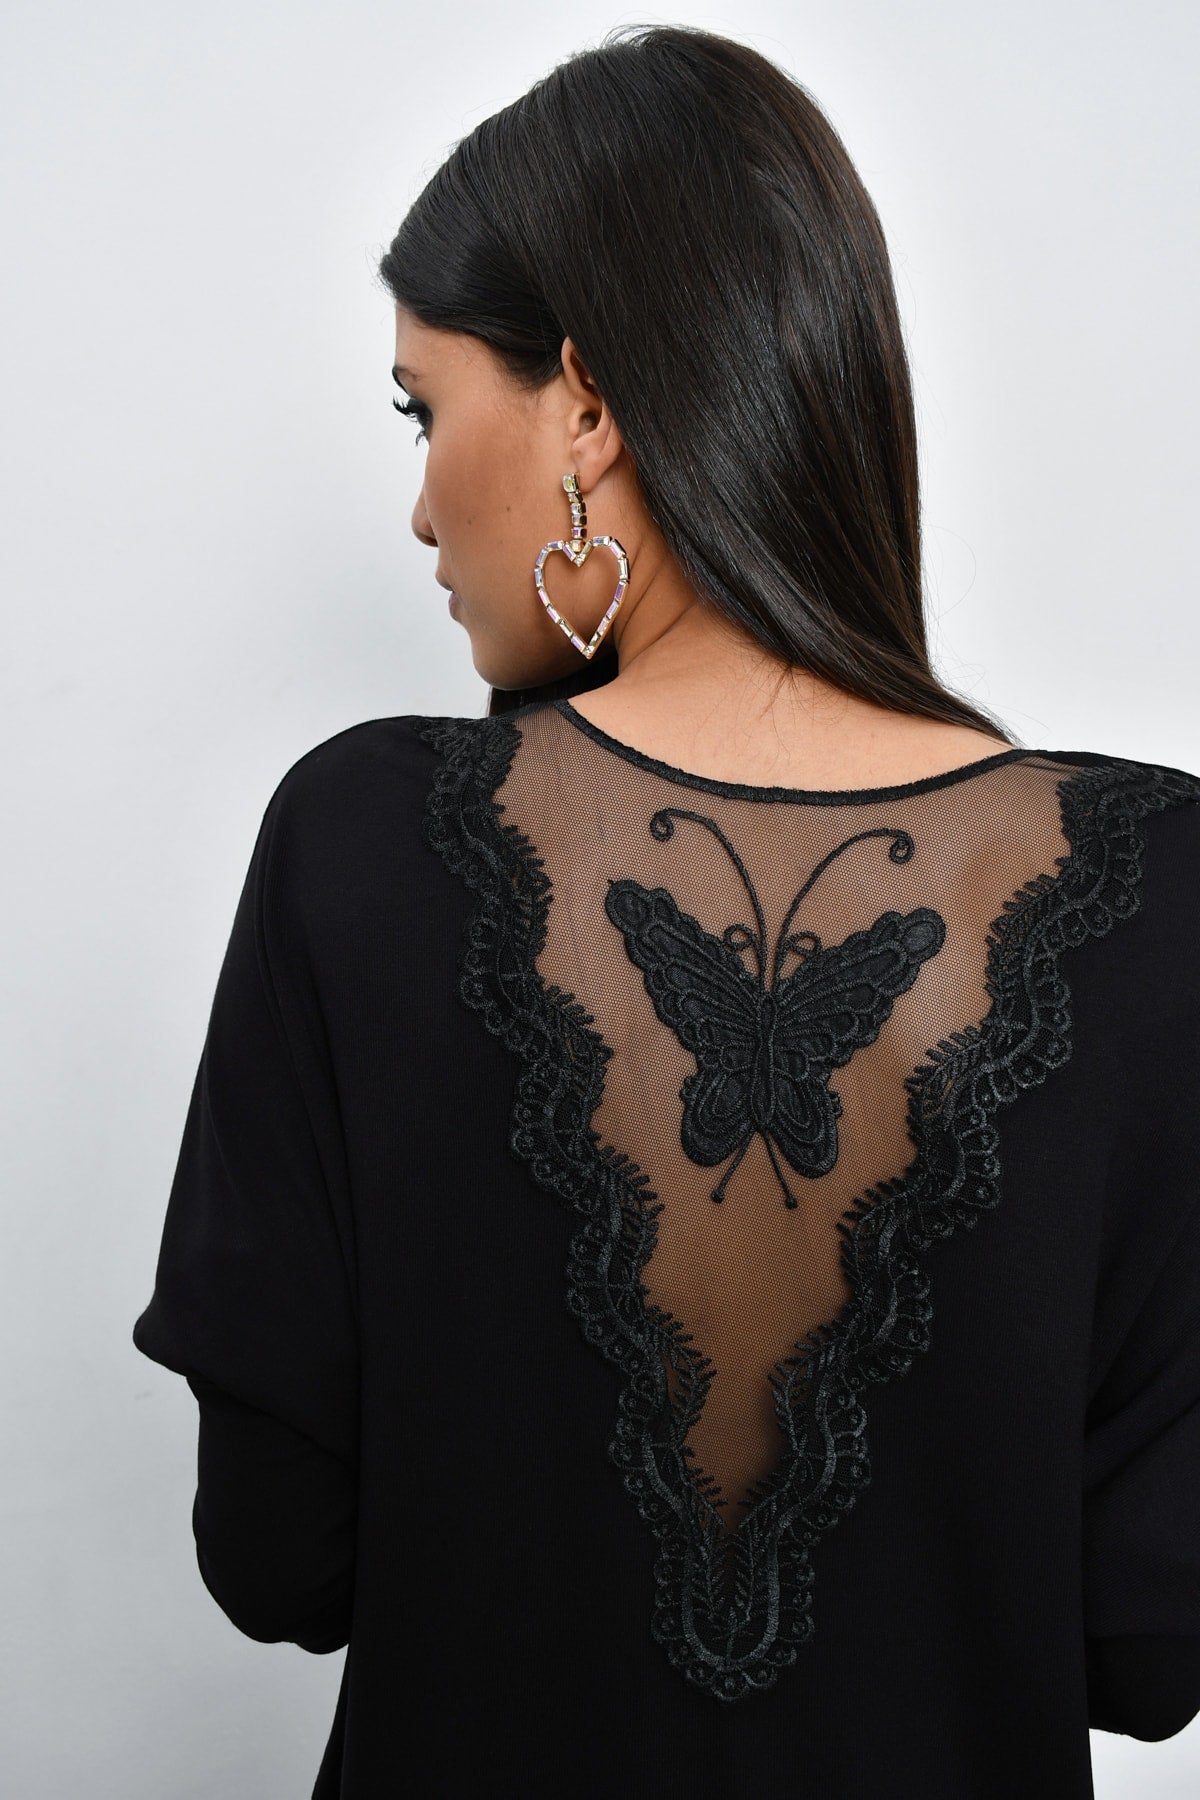 Sheer Black Women's Blouse with Butterfly Embroidery - Sexy V-Neck, Long Sleeves, and Stylish Solid Design